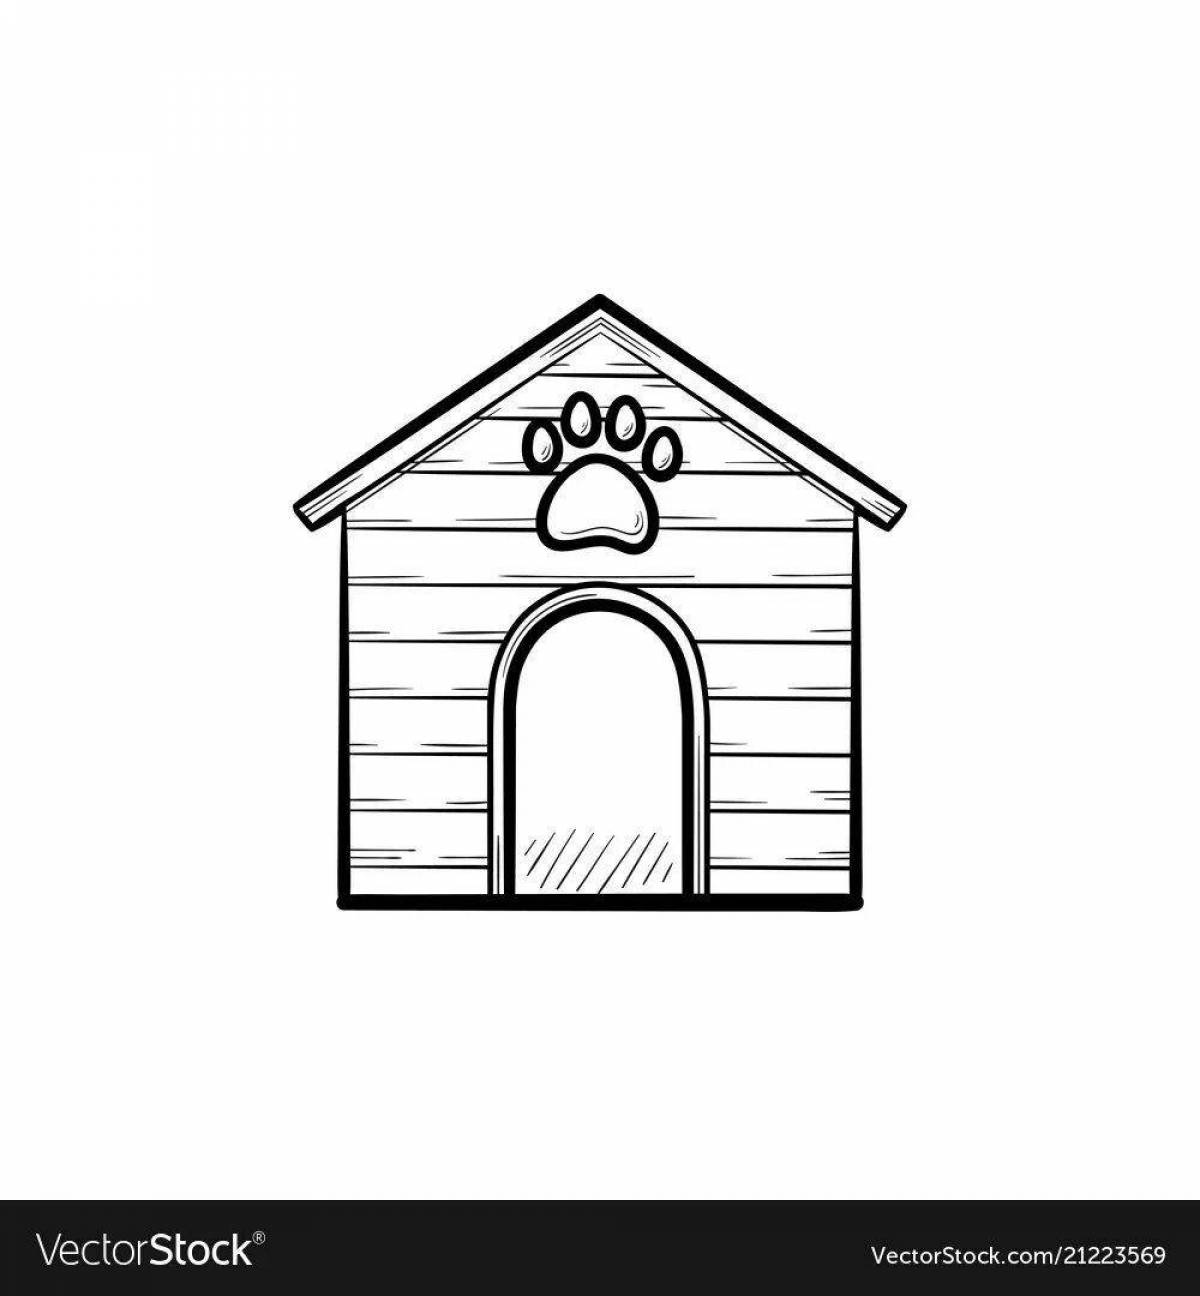 Coloring page gorgeous dog house